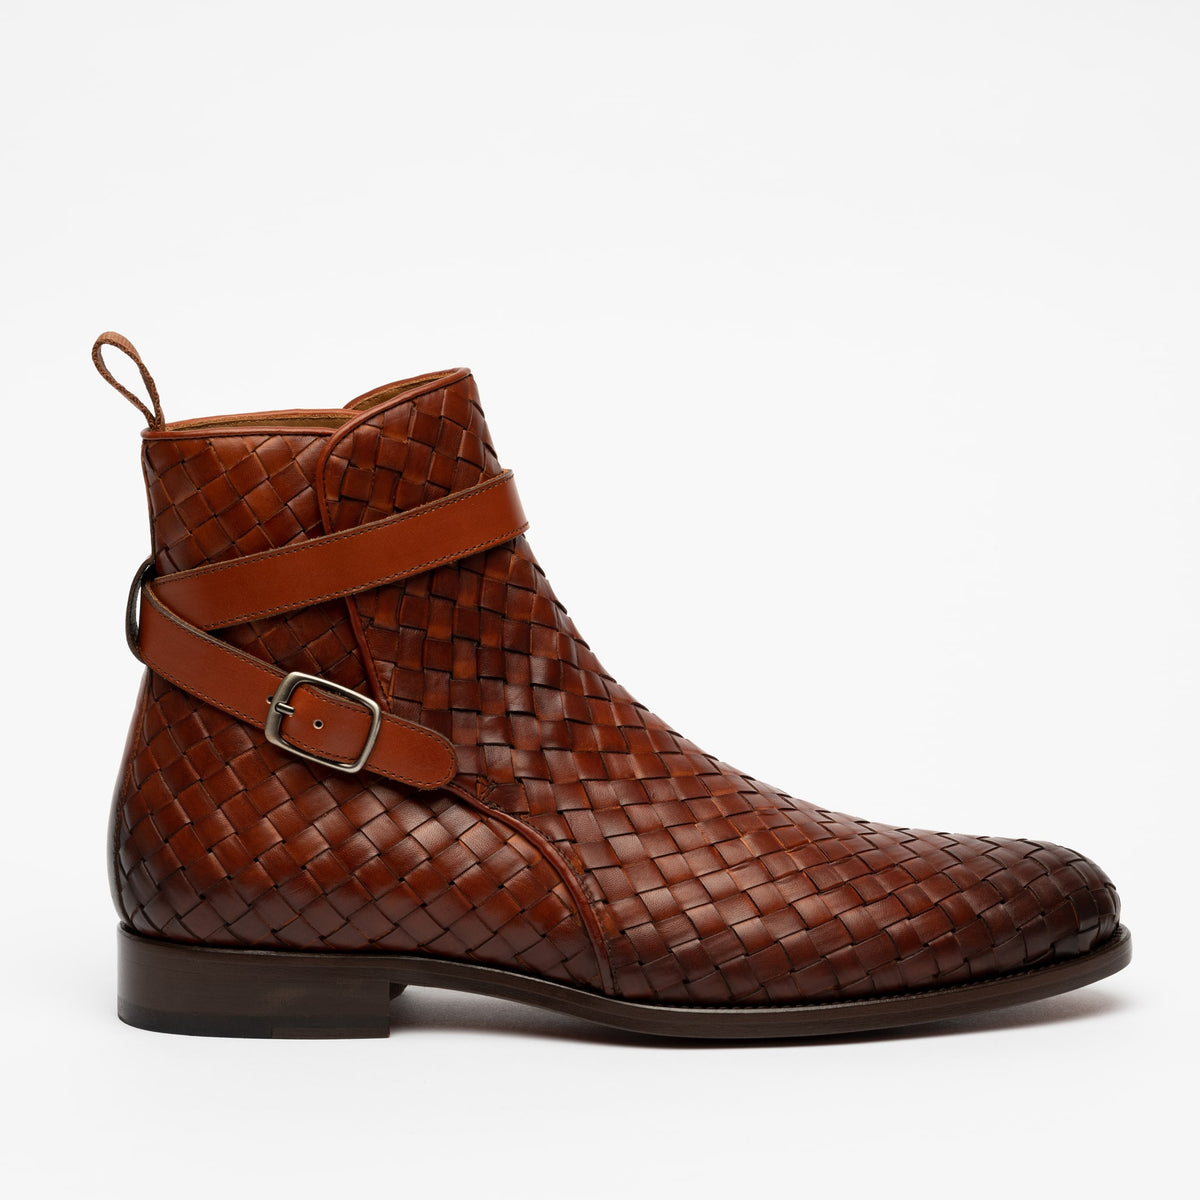 The Dylan Boot in Woven side